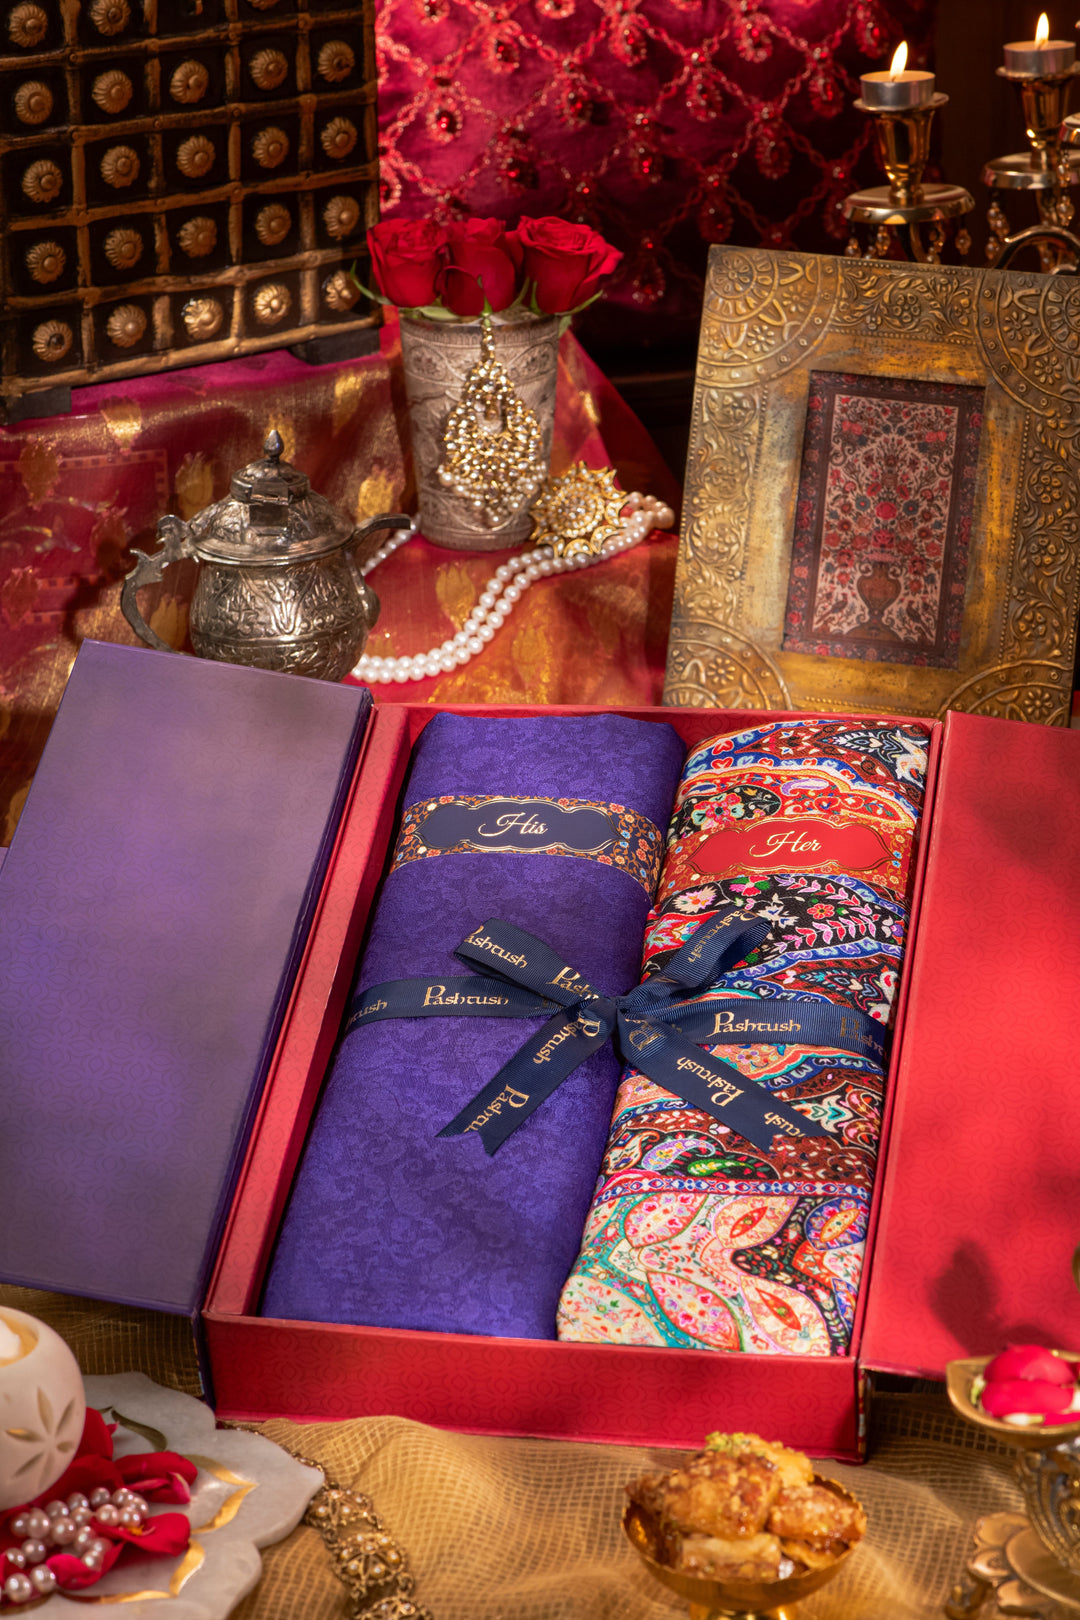 Pashtush India Gift Pack Pashtush His And Her Gift Set Of Fine Wool Self Stole and Bamboo Stole With Premium Gift Box Packaging, Violet and Multicolour